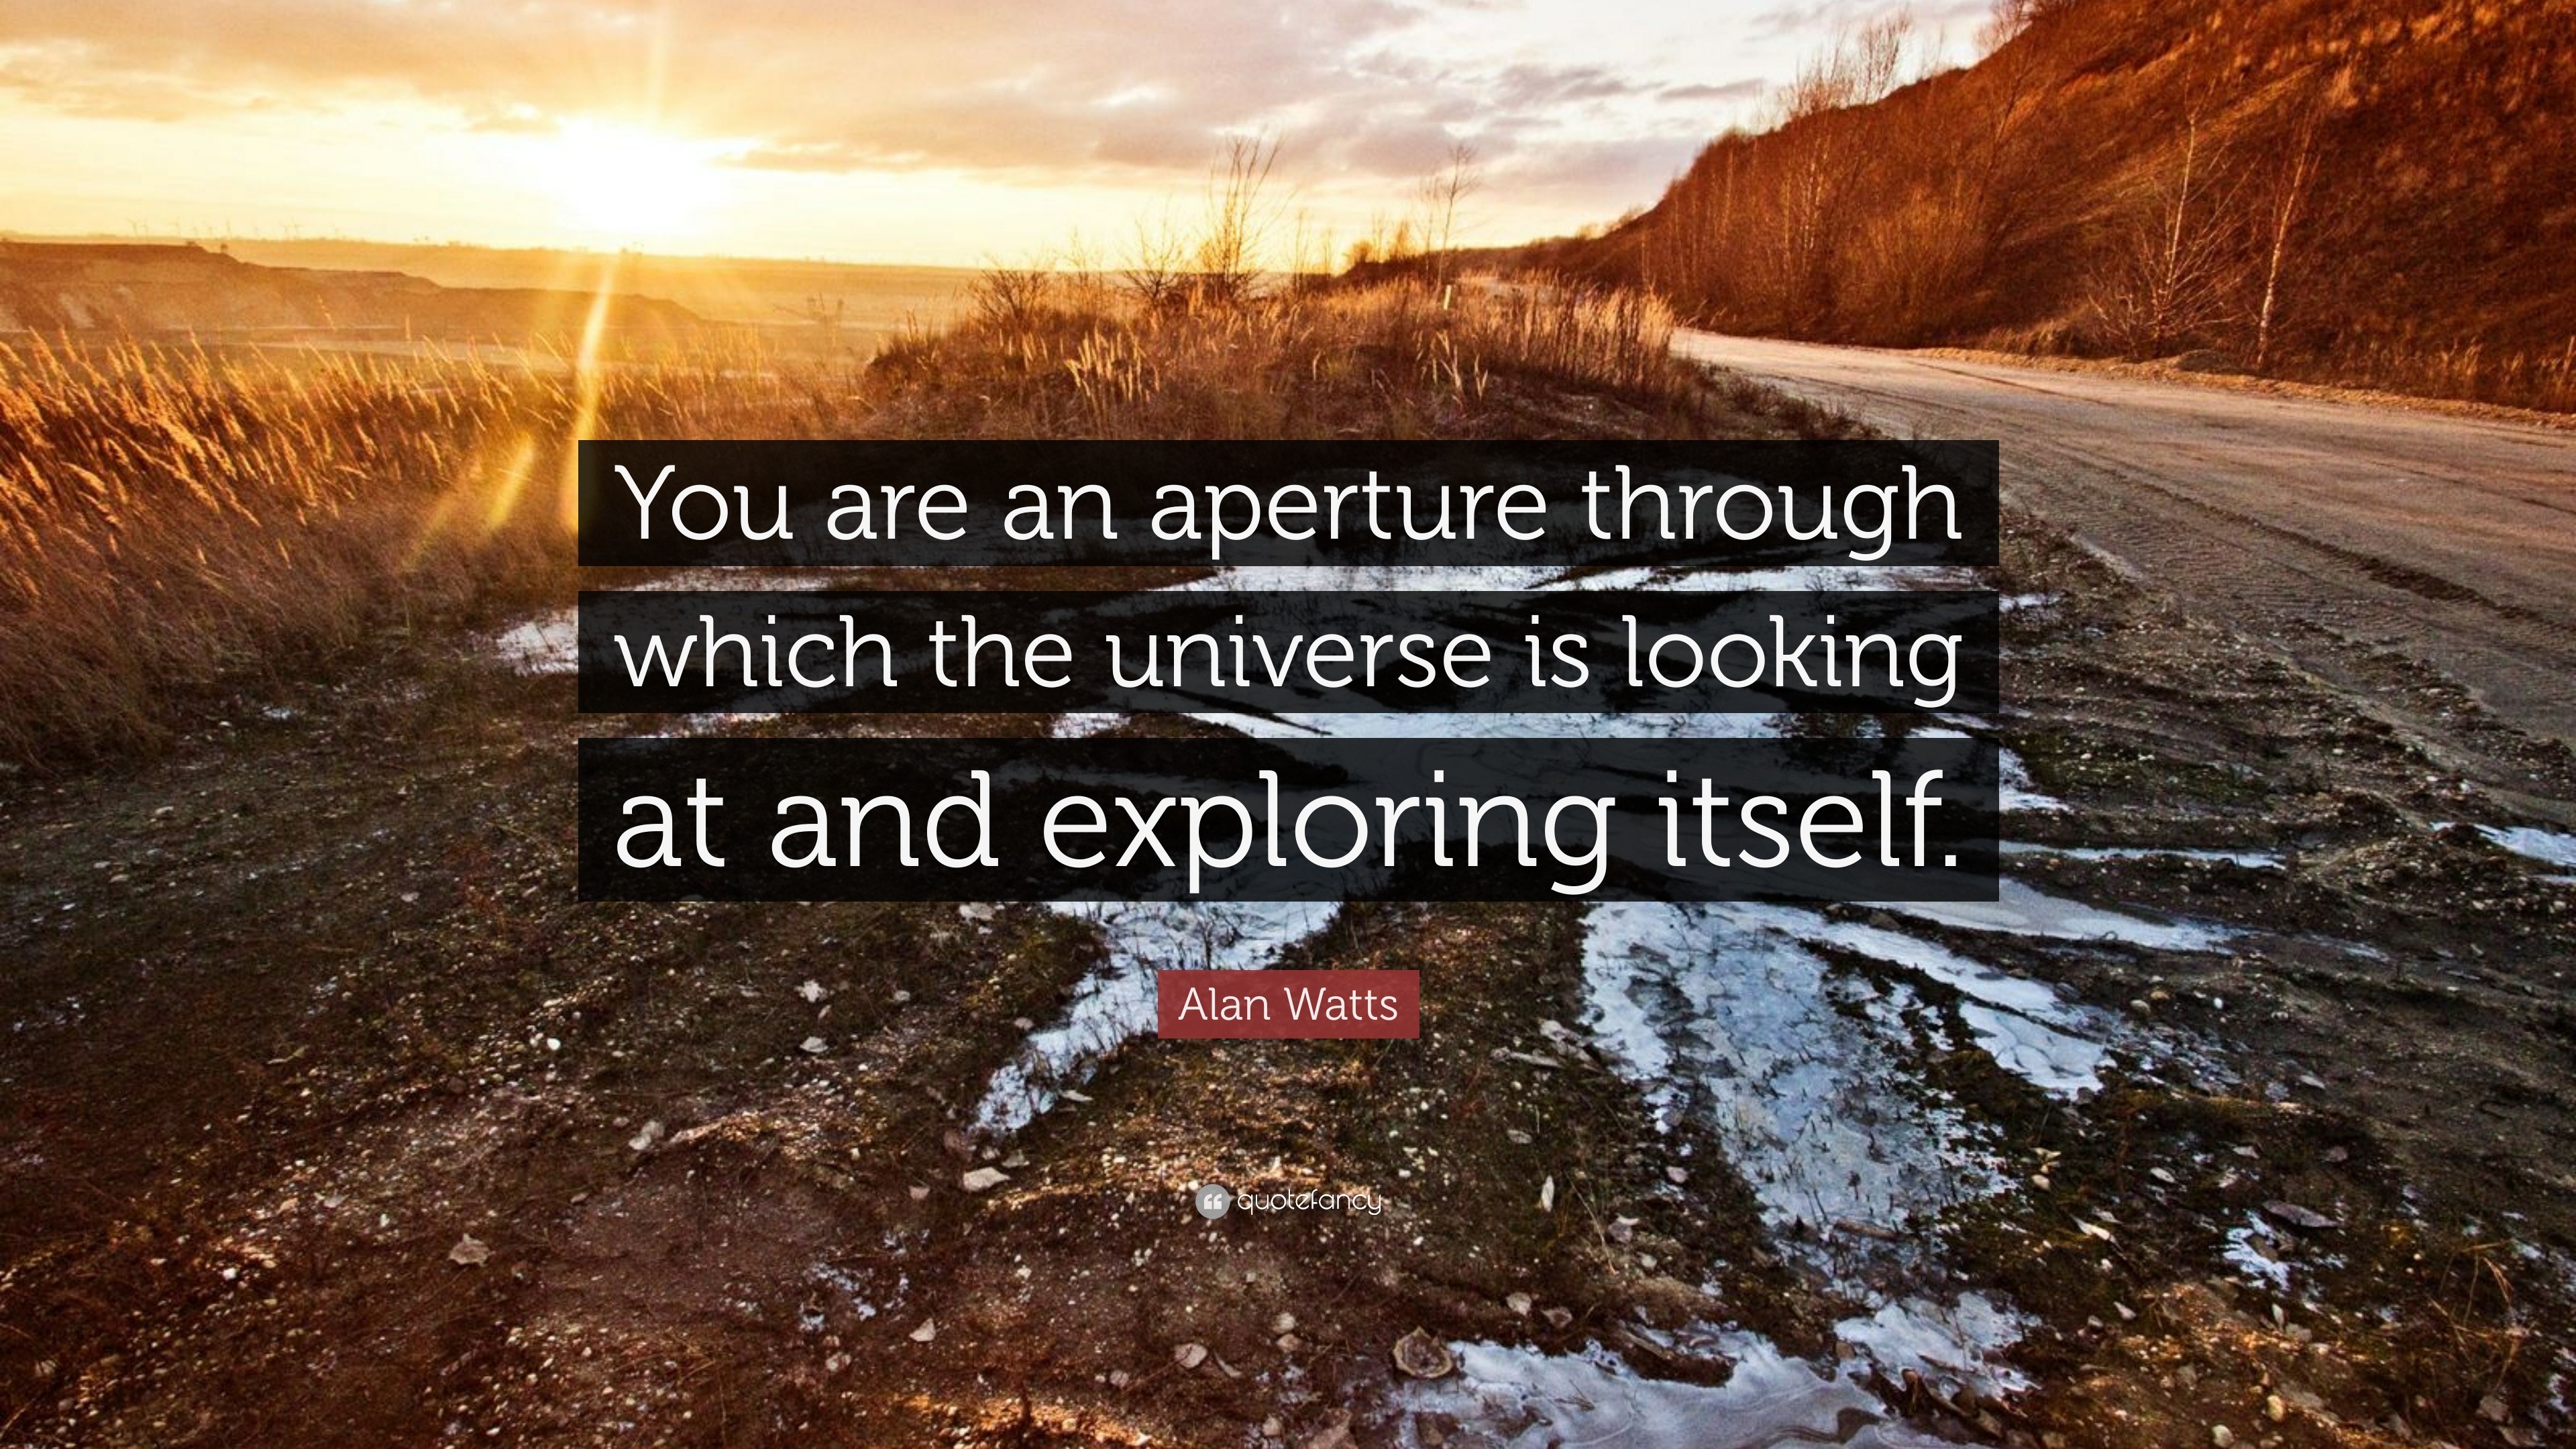 Alan Watts Quote: “You are an aperture through which the universe is